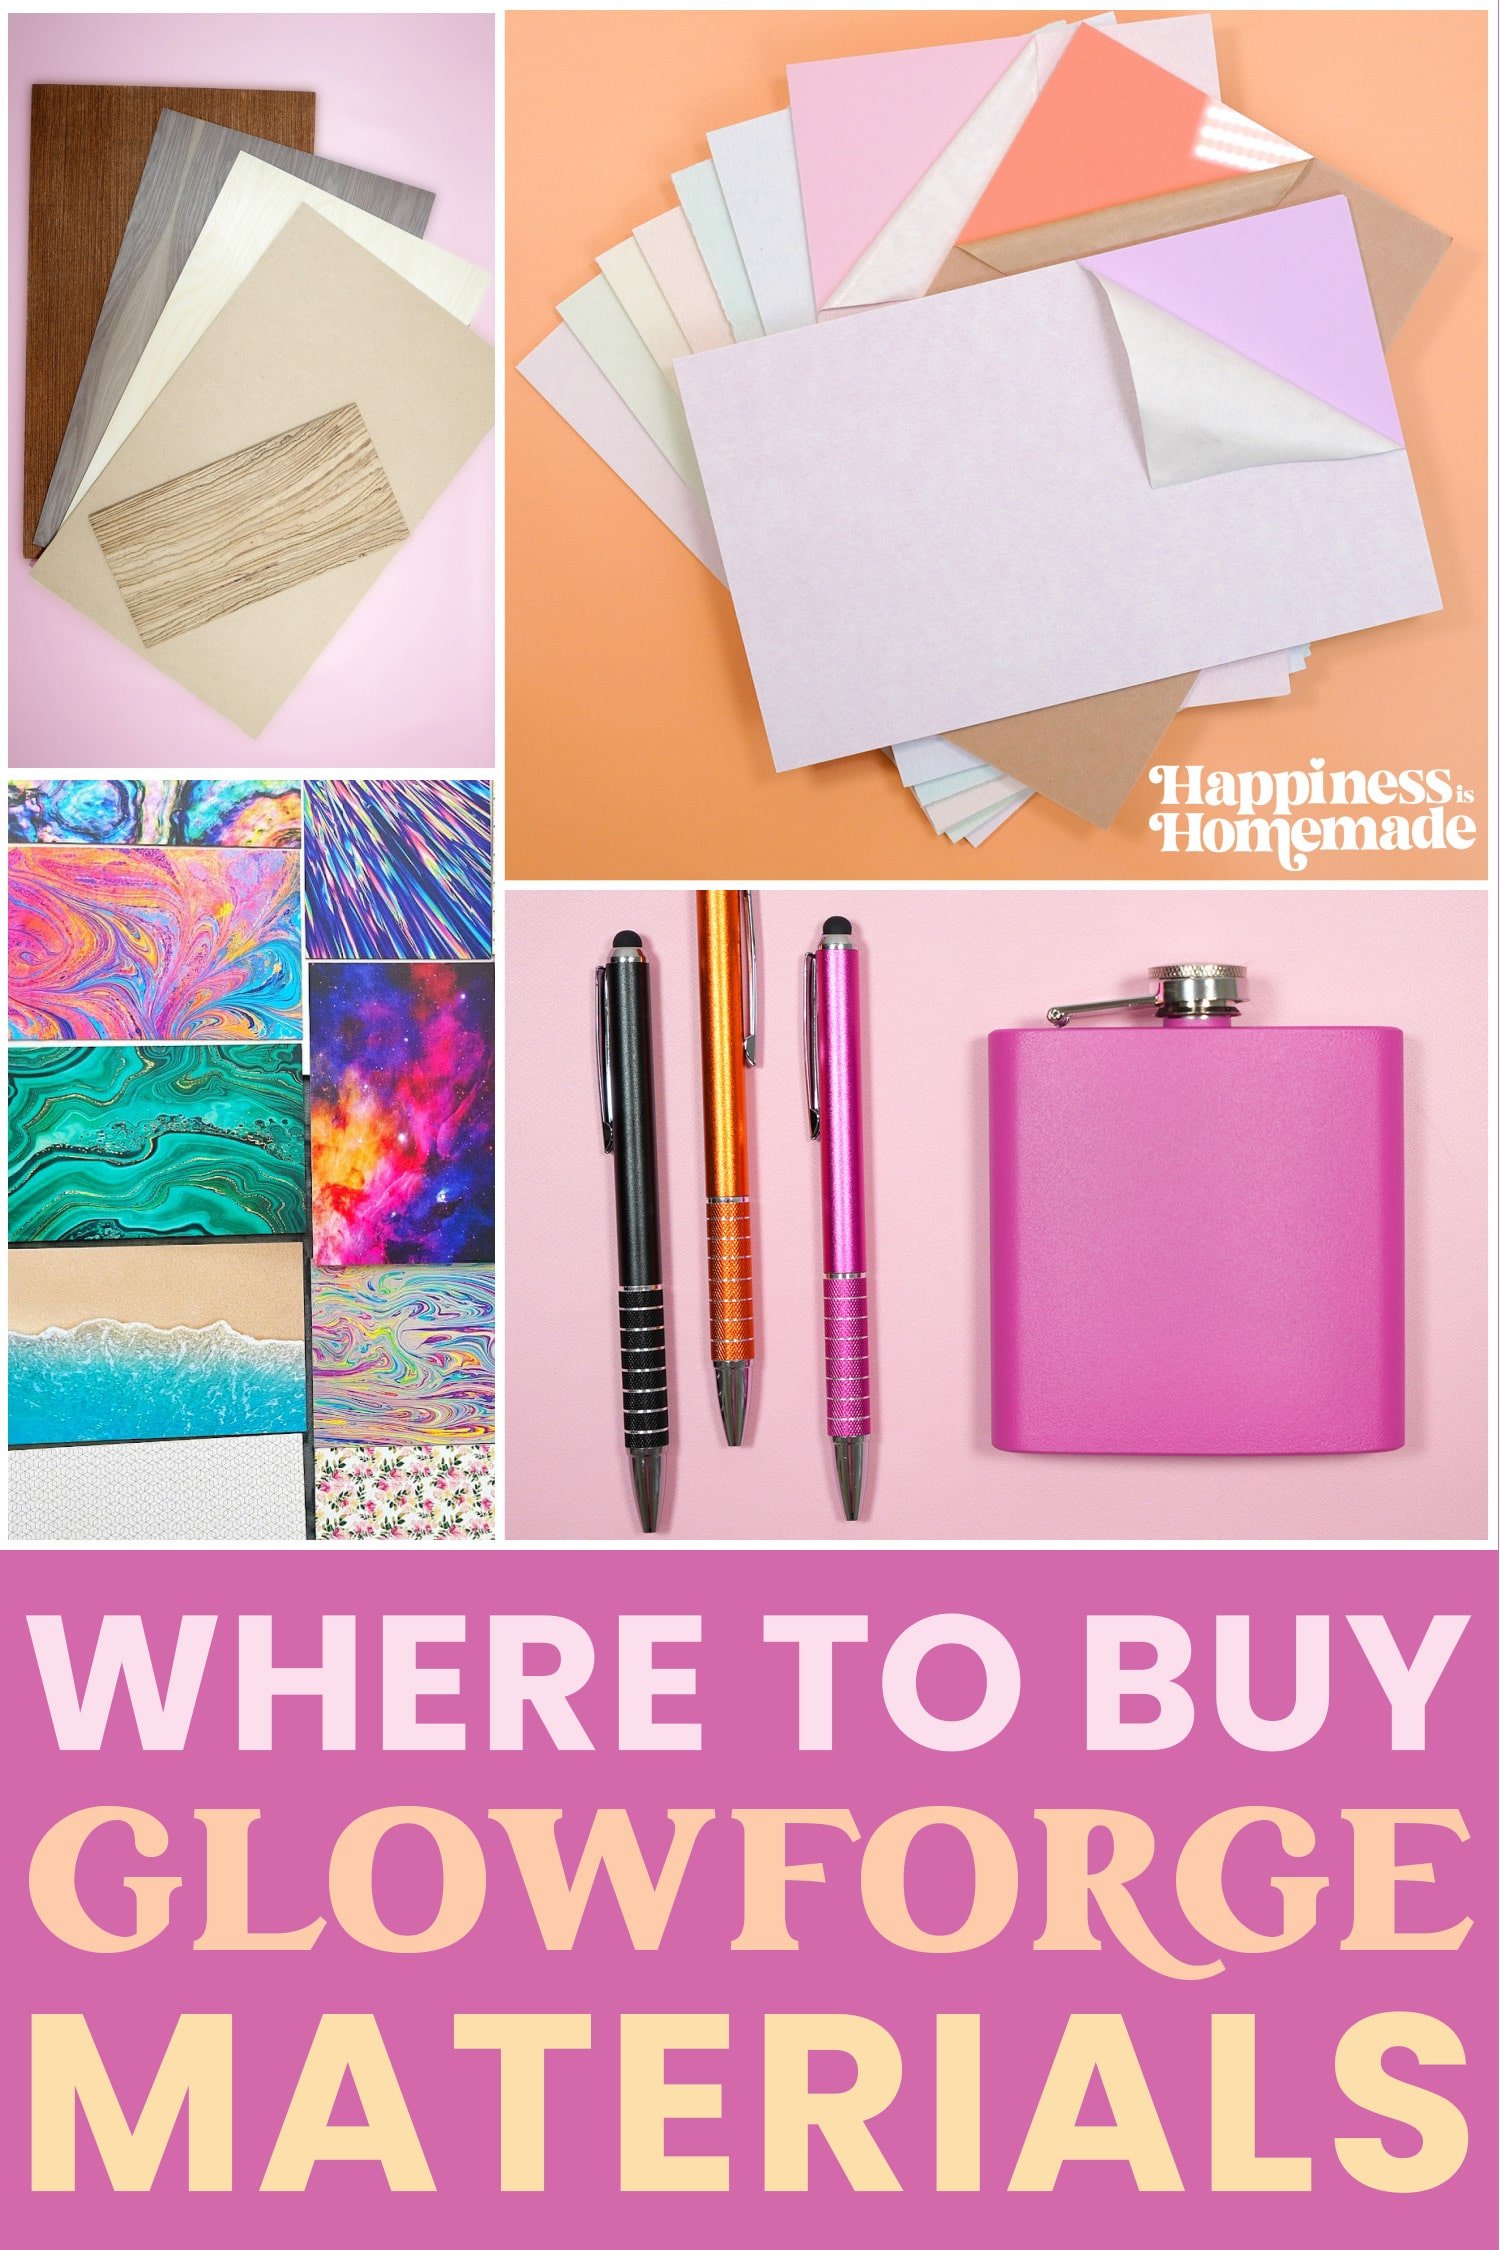 Where to Buy Glowforge Materials: The ULTIMATE Guide!